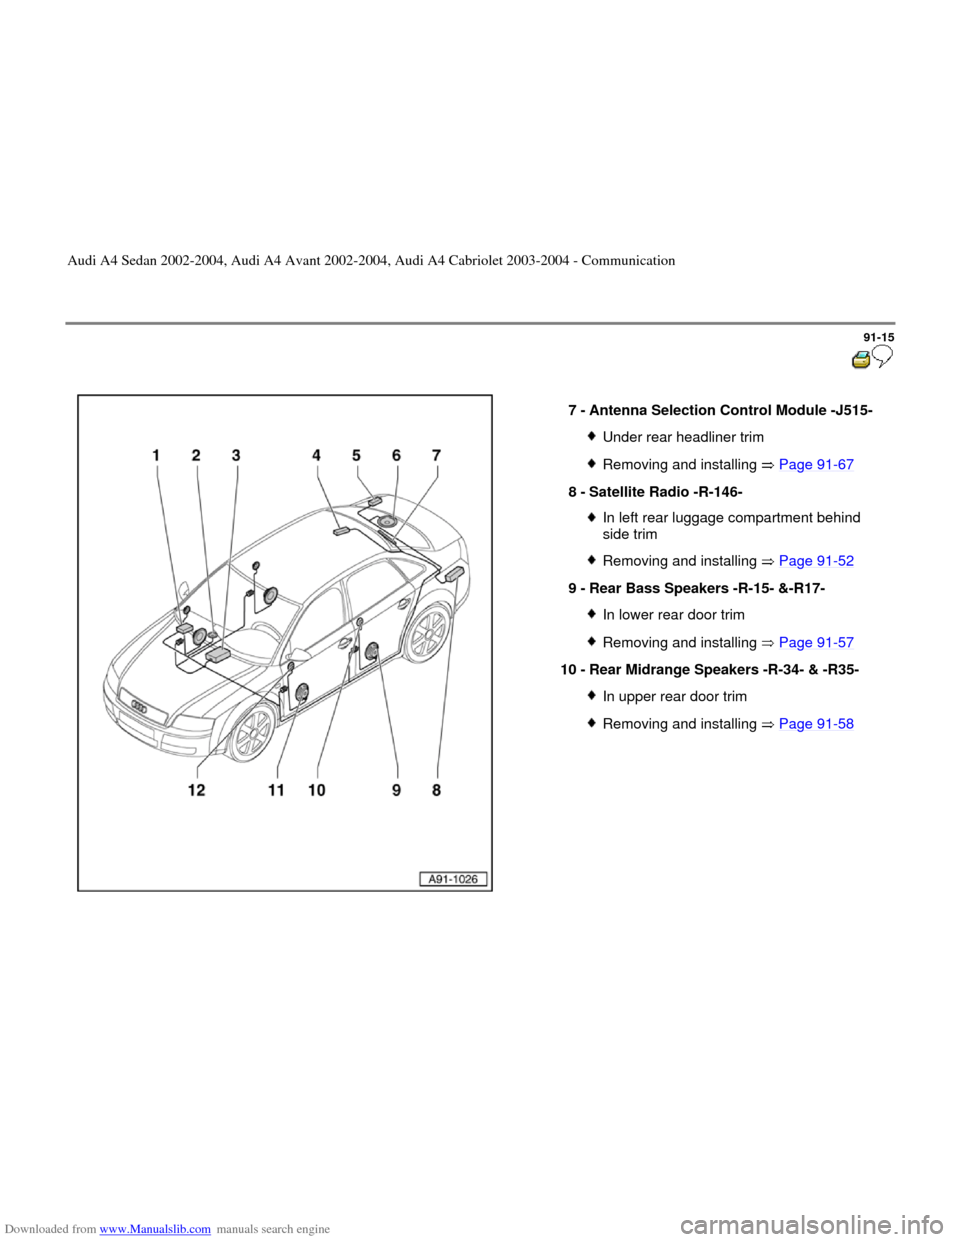 AUDI A4 2002 B5 / 1.G Radio System General Information Downloaded from www.Manualslib.com manuals search engine 91-15
 
  
7 - 
Antenna Selection Control Module -J515- 
Under rear headliner trimRemoving and installing   Page 91
-67
8 - 
Satellite Radio -R